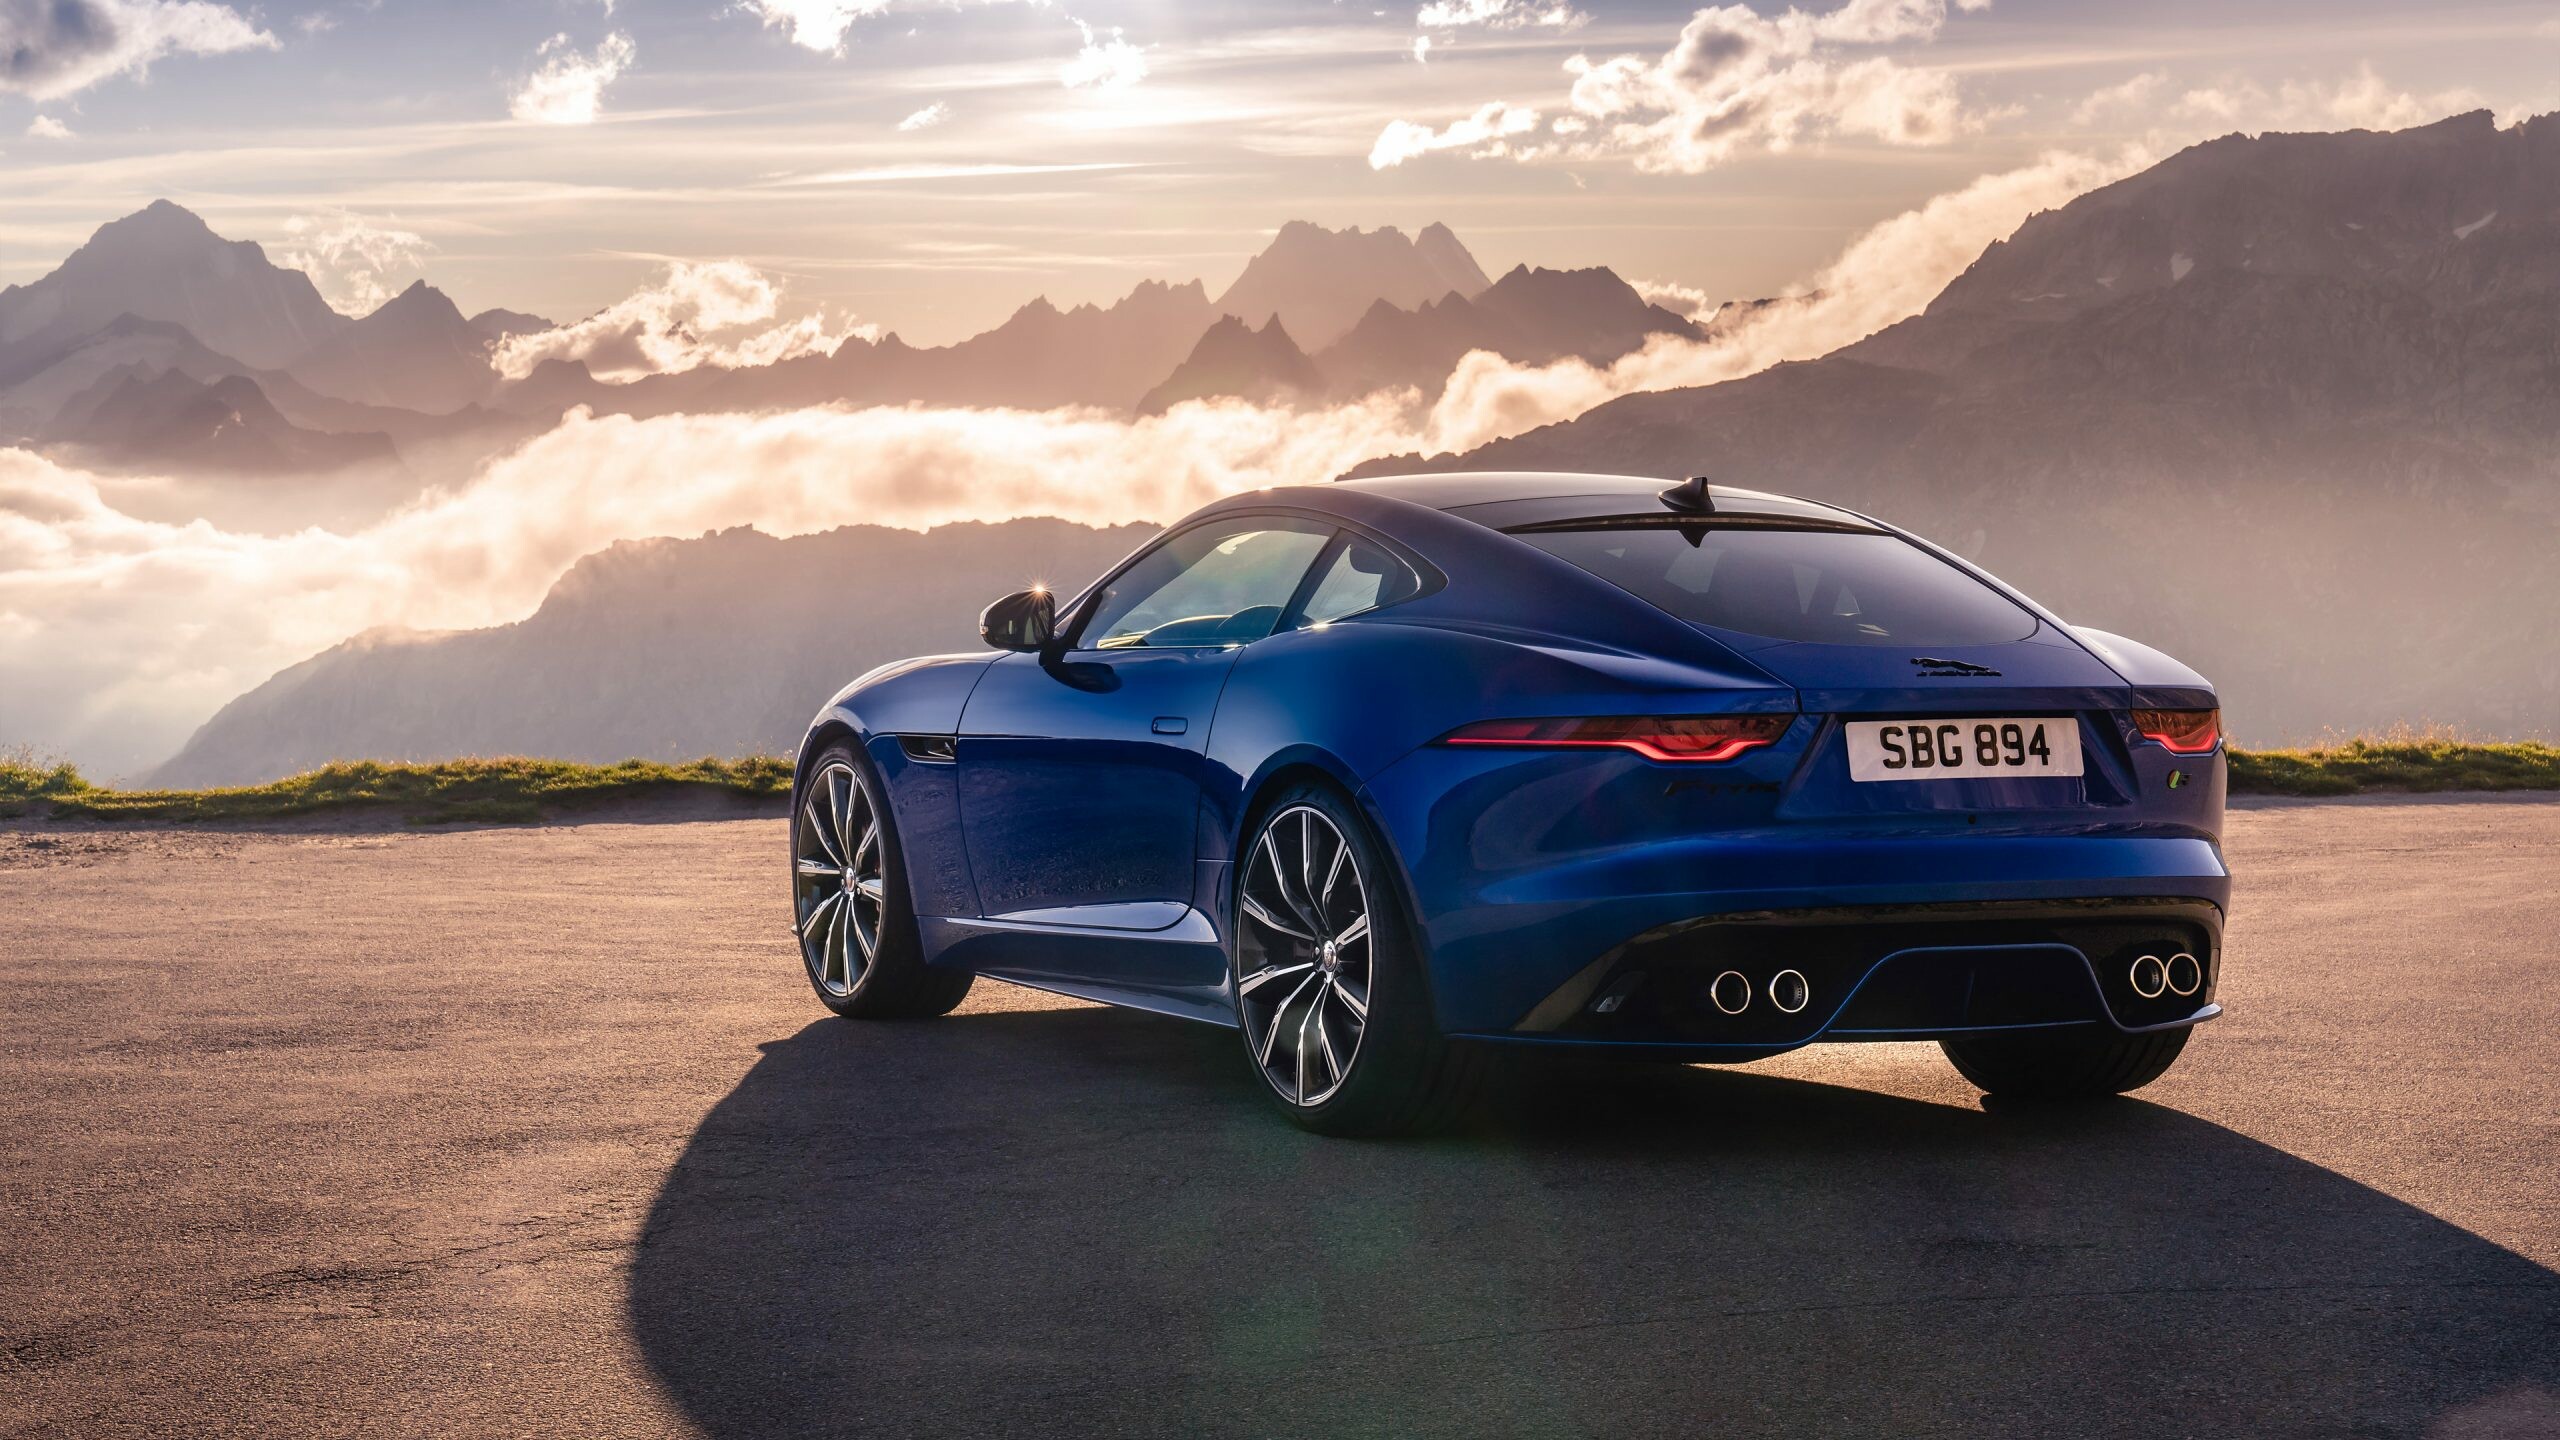 Jaguar Cars: The luxury vehicle brand of JLR, F-Type R Coupe. 2560x1440 HD Background.